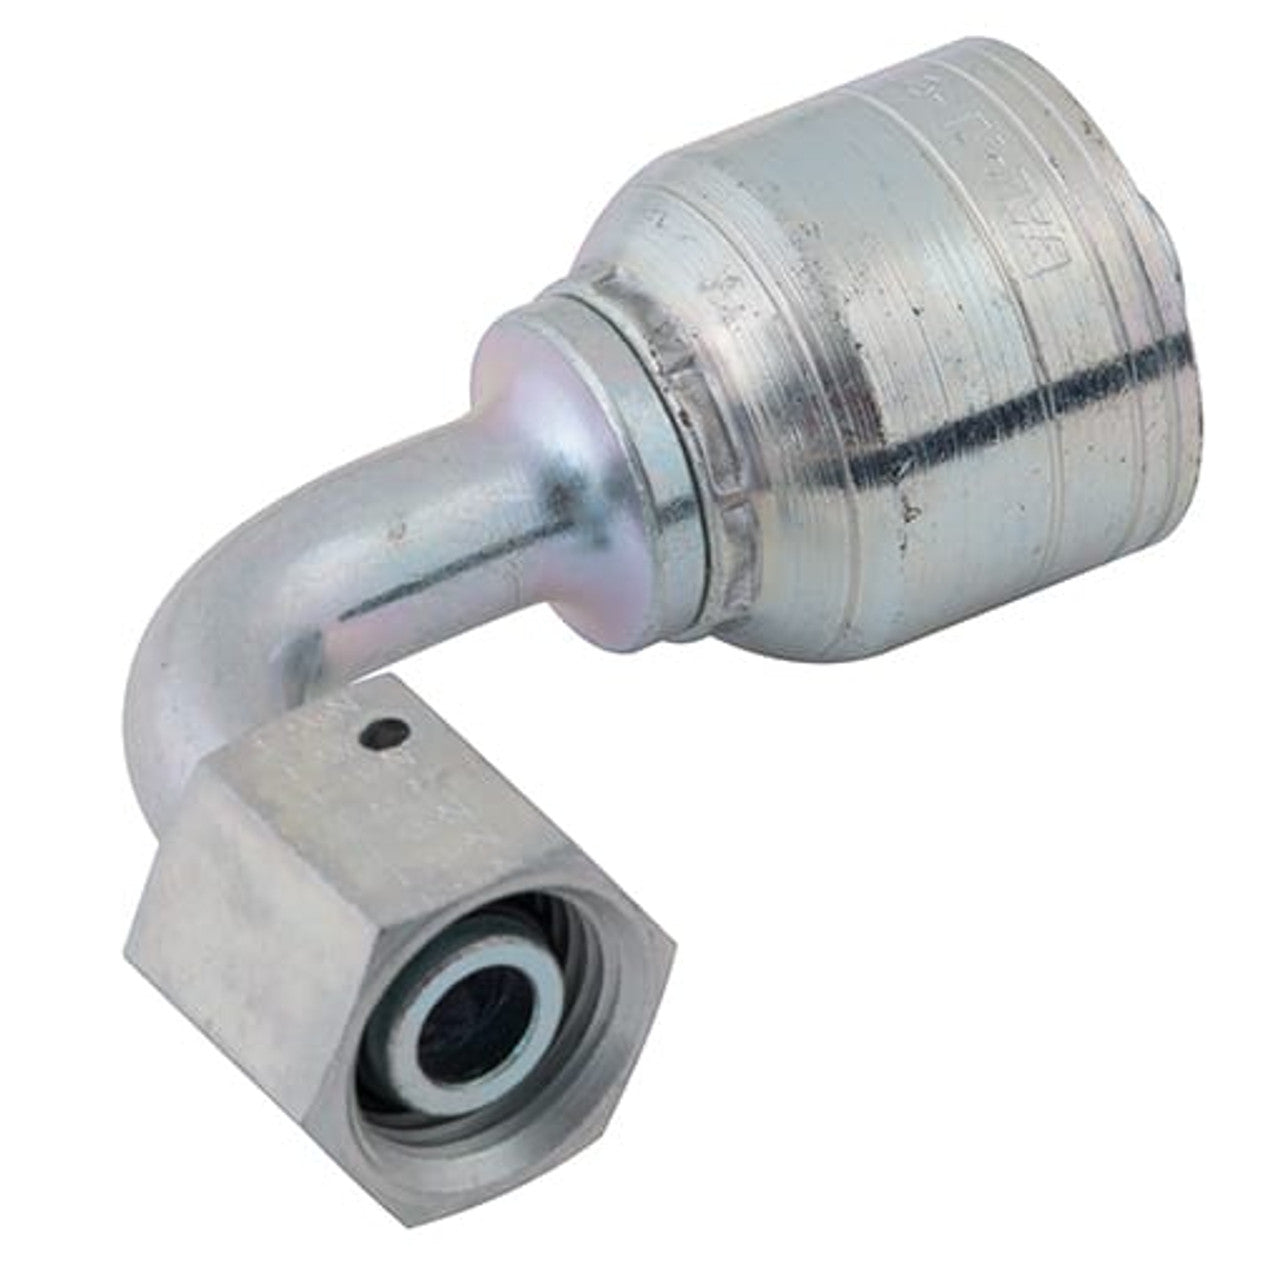 66X2 by Danfoss, Compression Fitting, Female Connector